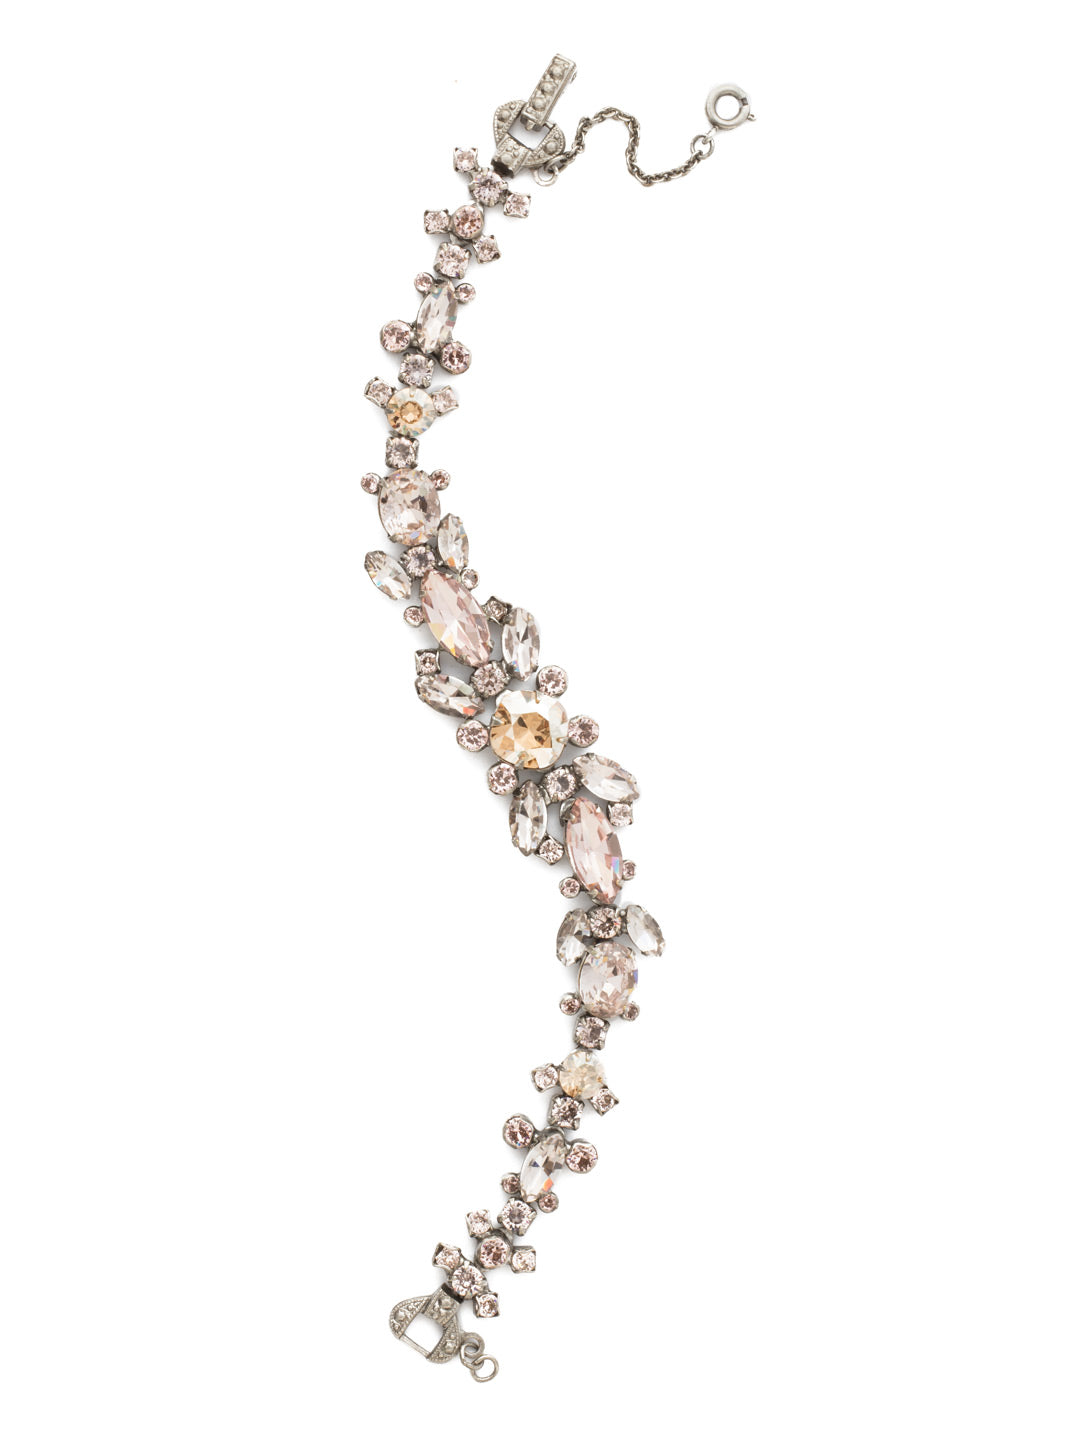 Aubretia Bracelet - BDT16ASSBL - <p>Navette and round crystals alternate in a linear pattern, flanked by a mix of delicate stones. From Sorrelli's Satin Blush collection in our Antique Silver-tone finish.</p>